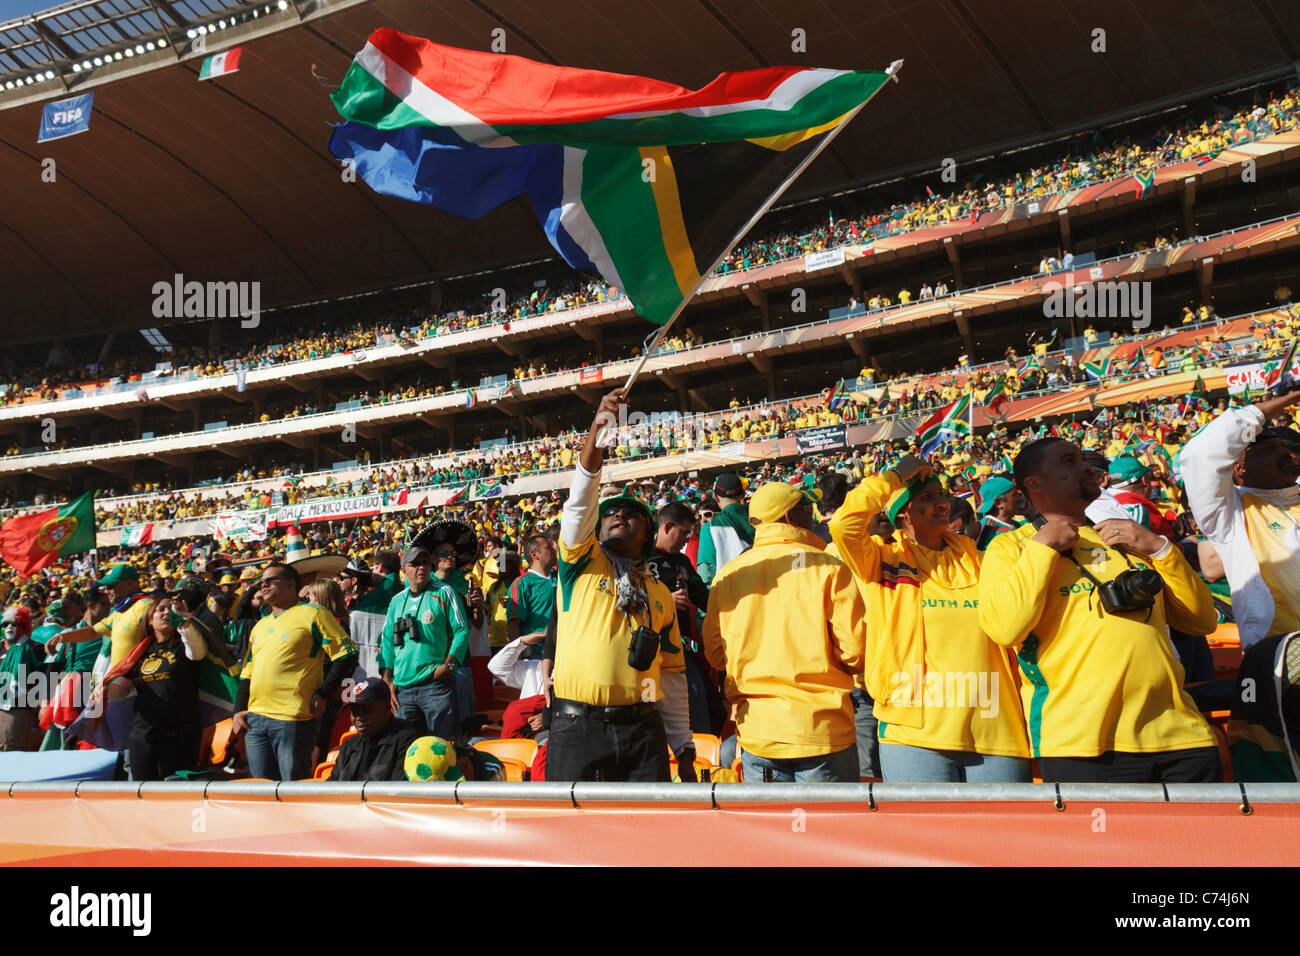 A South Africa supporter waves the national flag at the opening match of the 2010 FIFA World Cup between South Africa and Mexico Stock Photo